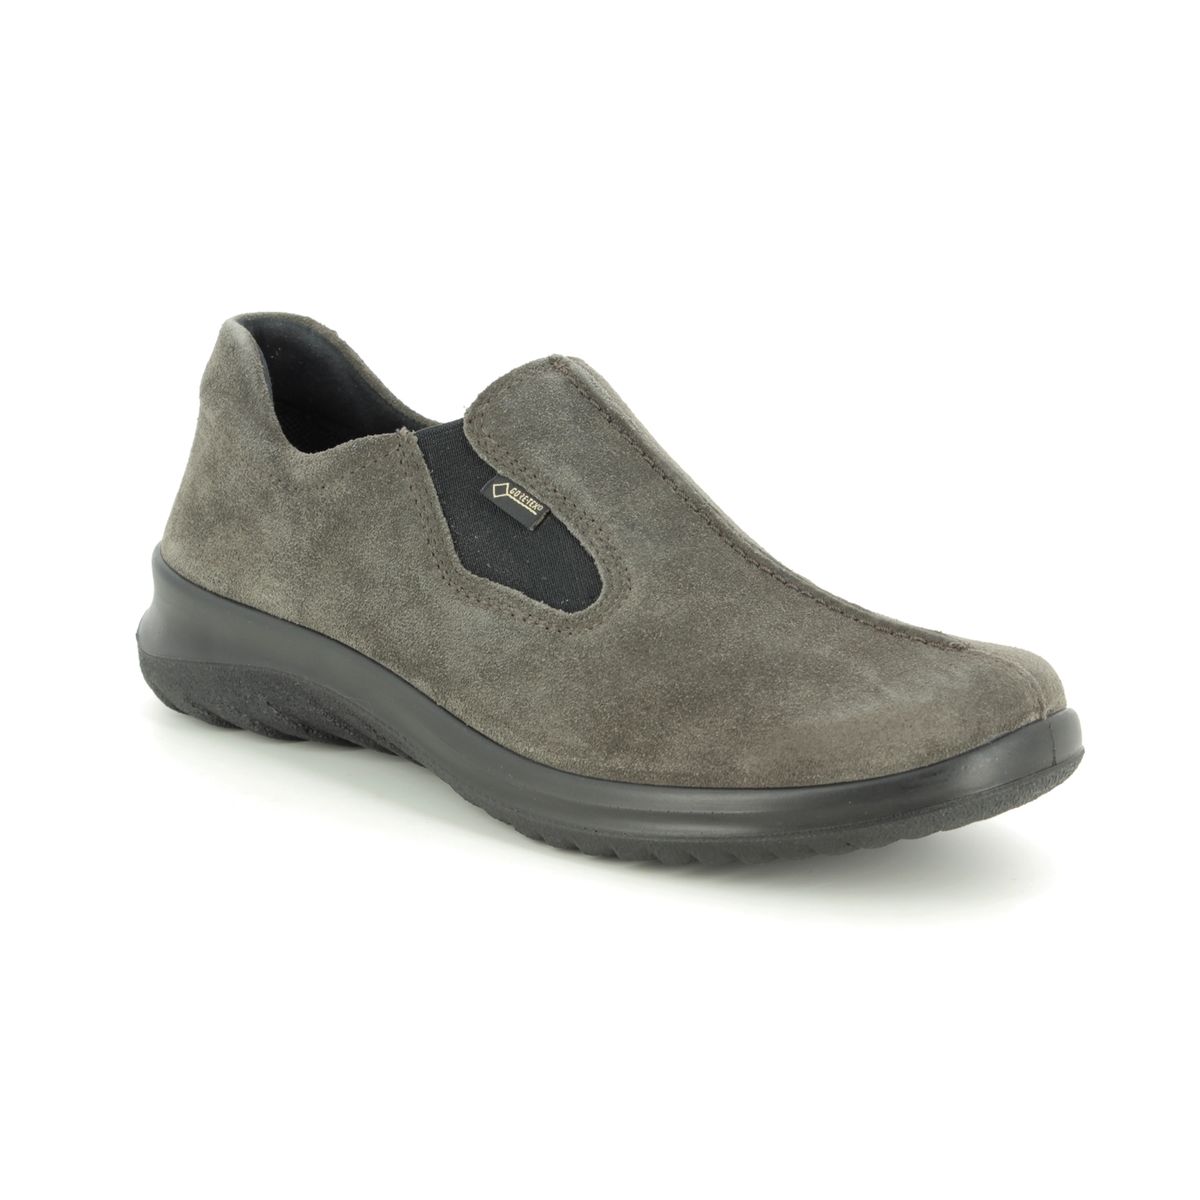 Legero Soft Shoe Gtx Grey Suede Womens Comfort Slip On Shoes 09568-28 In Size 7.5 In Plain Grey Suede